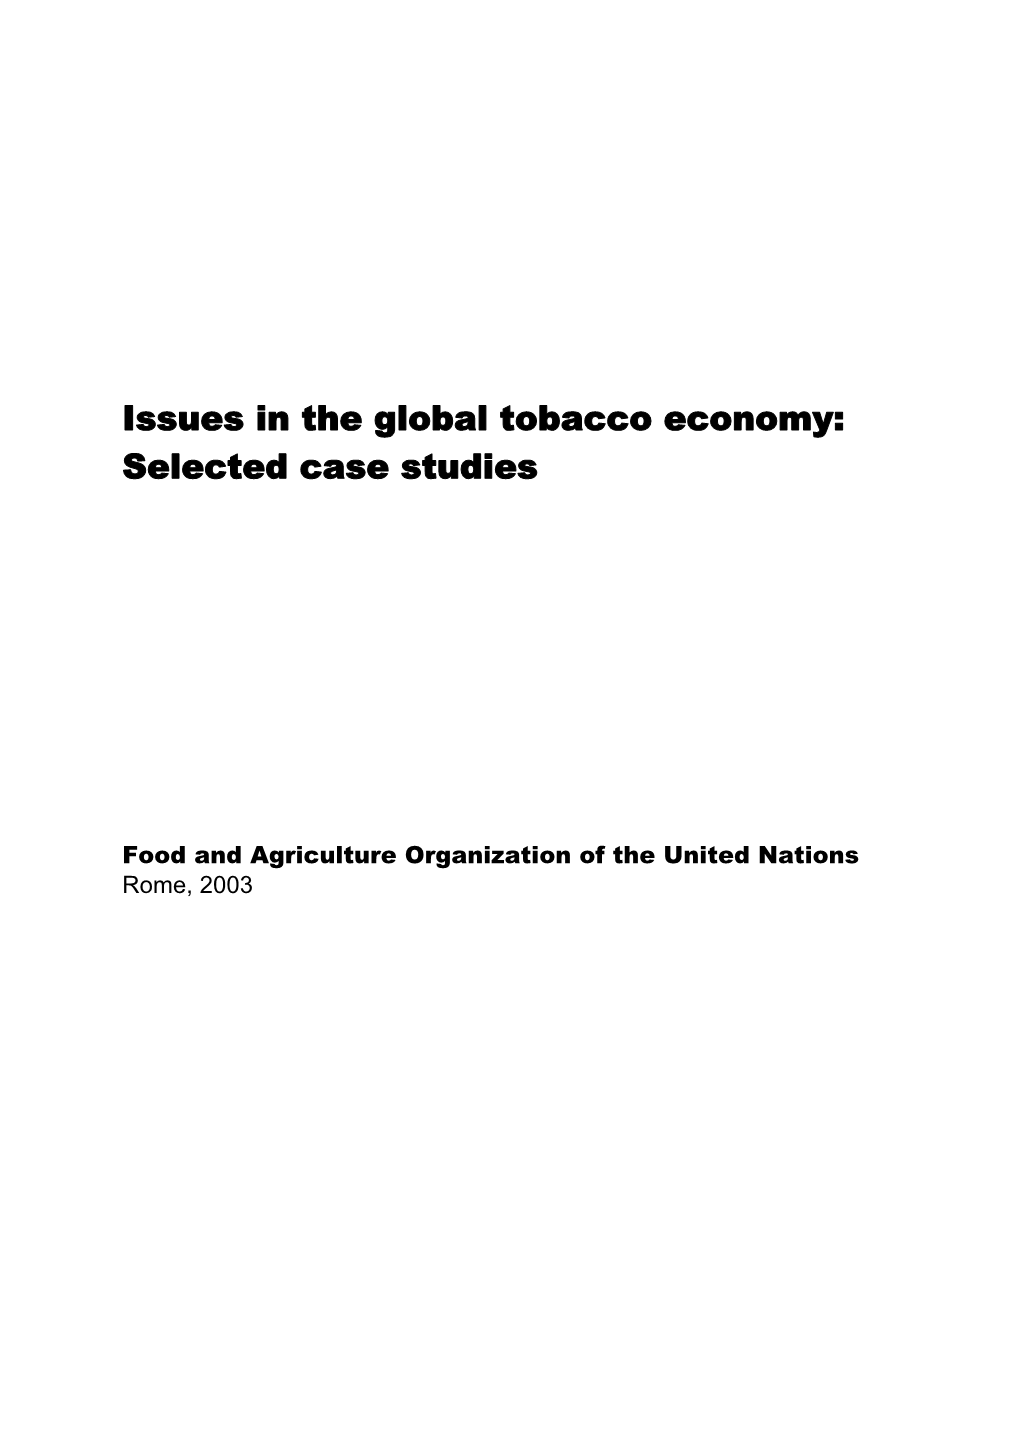 Issues in the Global Tobacco Economy: Selected Case Studies